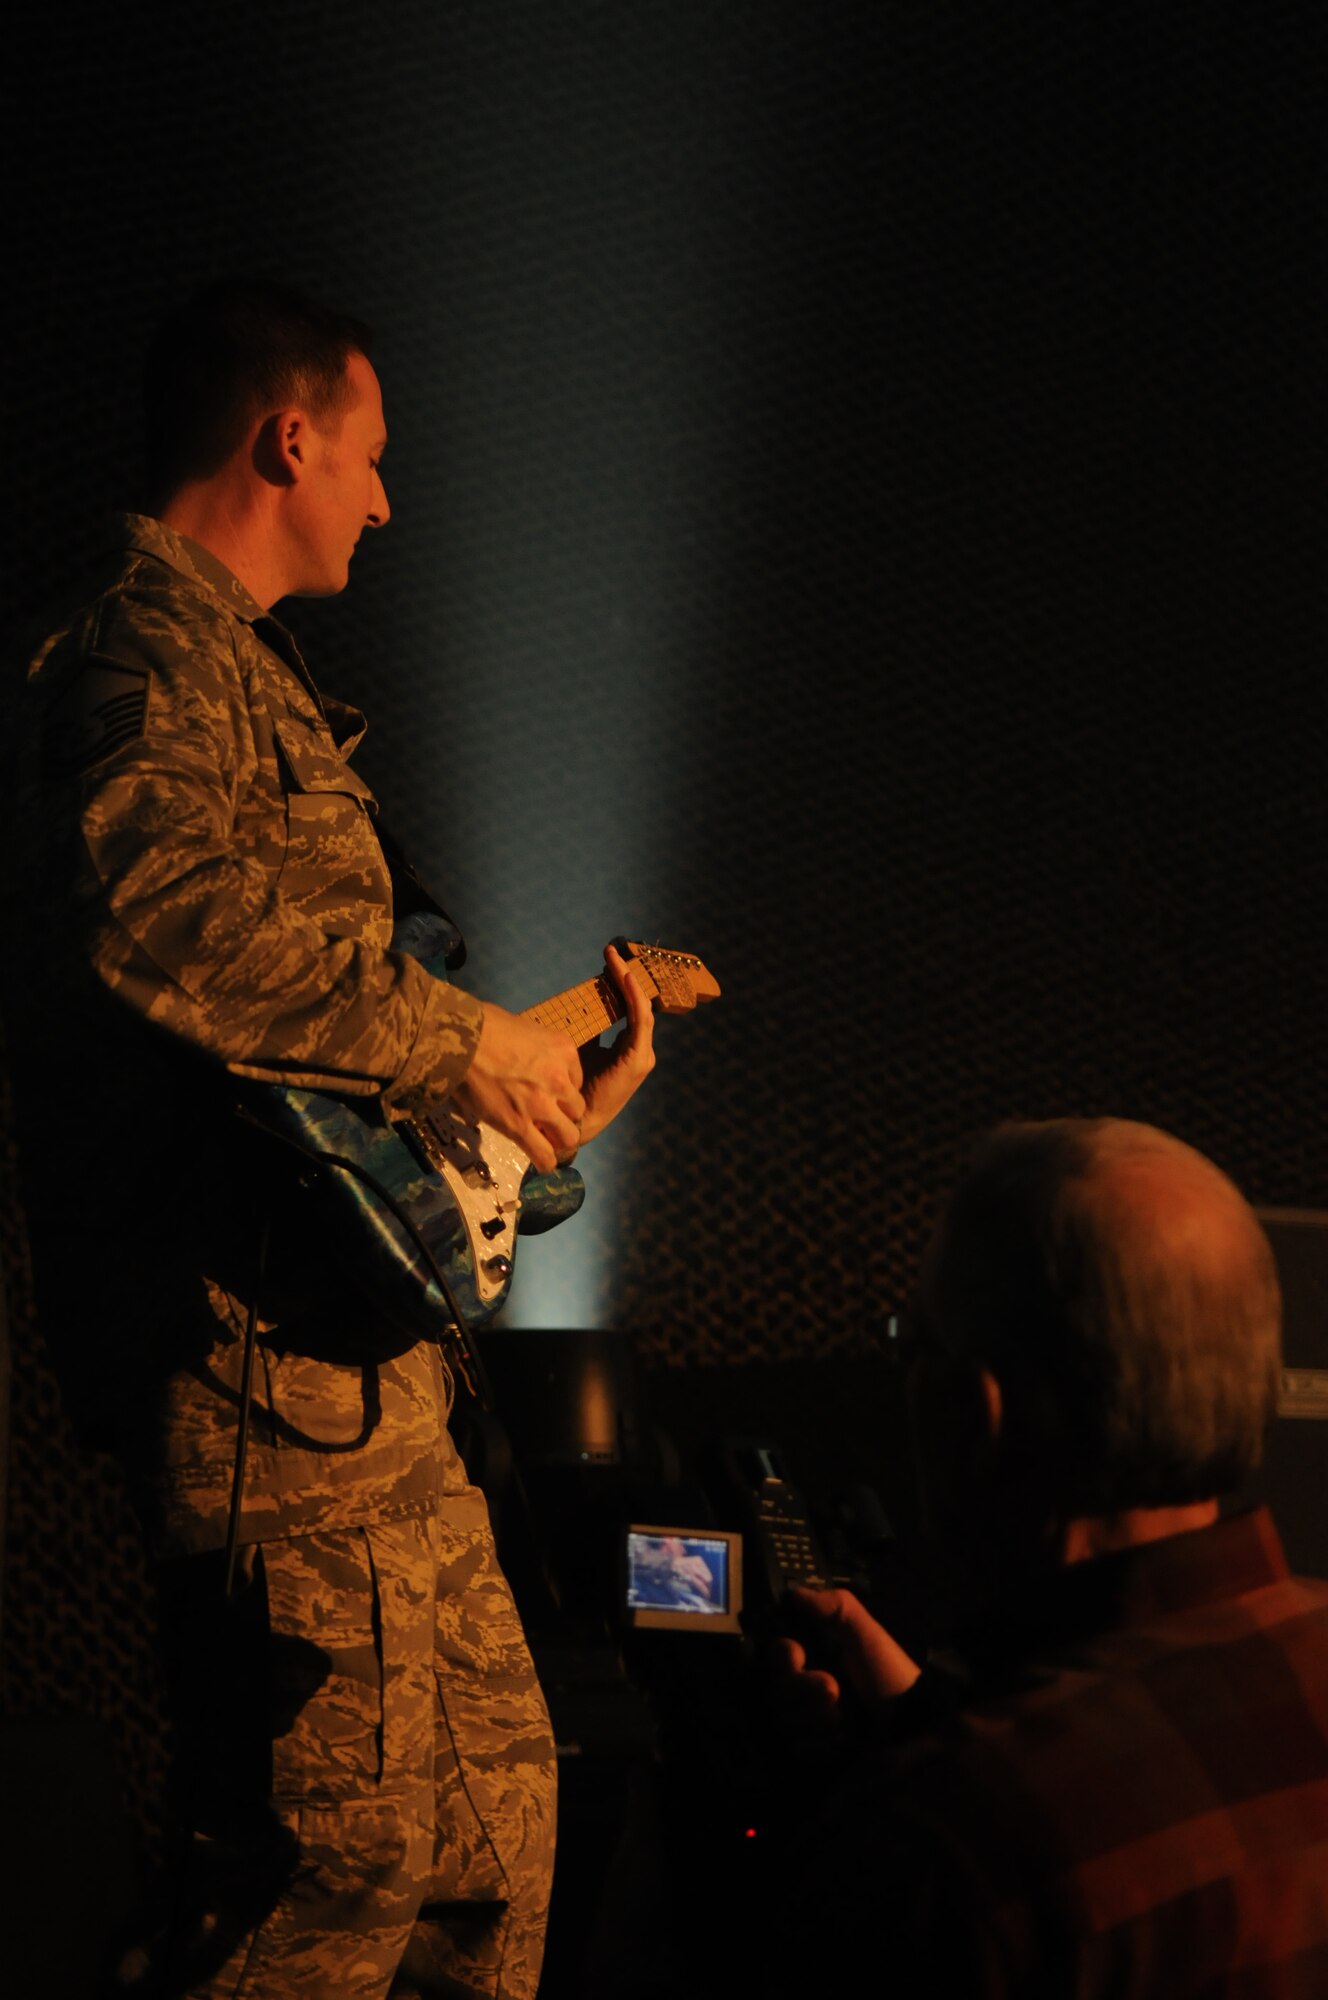 Max Impact, the United States Air Force Band’s rock group, records a video for their latest musical creation, “Locked and Loaded,” Feb. 24 at Hangar 2 on Bolling. The music video is part of Max Impact’s call “to motivate and inspire the newest generation of professional Airmen.” For more information, log on to www.usafband.af.mil. (U.S. Air Force photo by Staff Sgt. Christopher Mills)